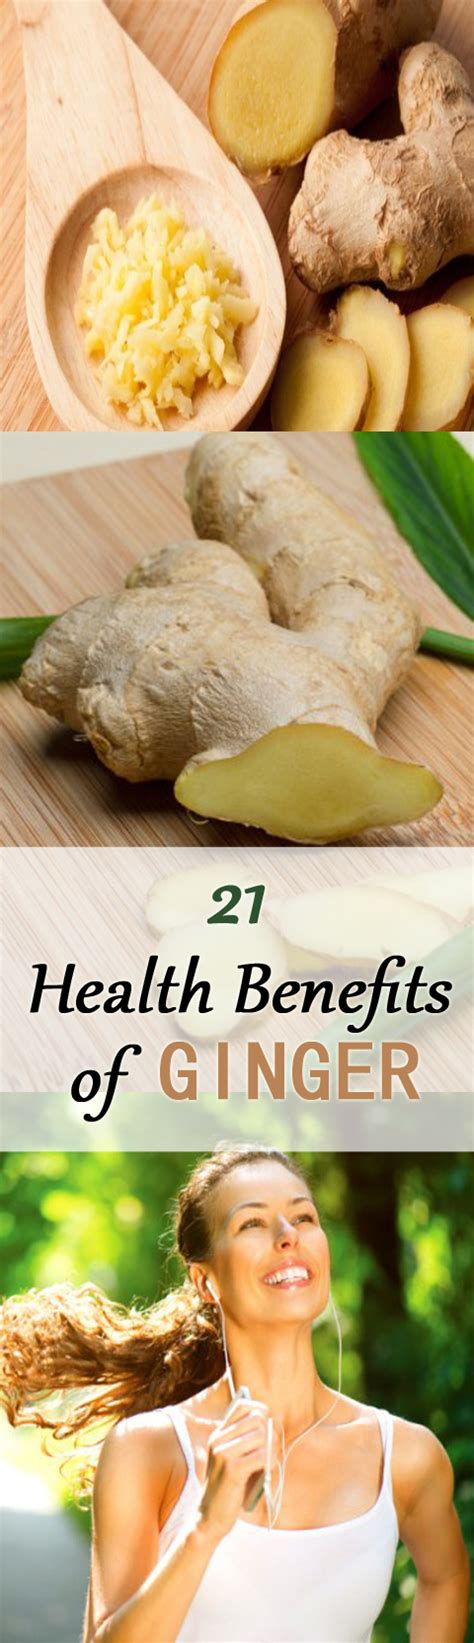 Health Benefits Everyone Needs To Know About Ginger Global Magazines Health Benefits Of